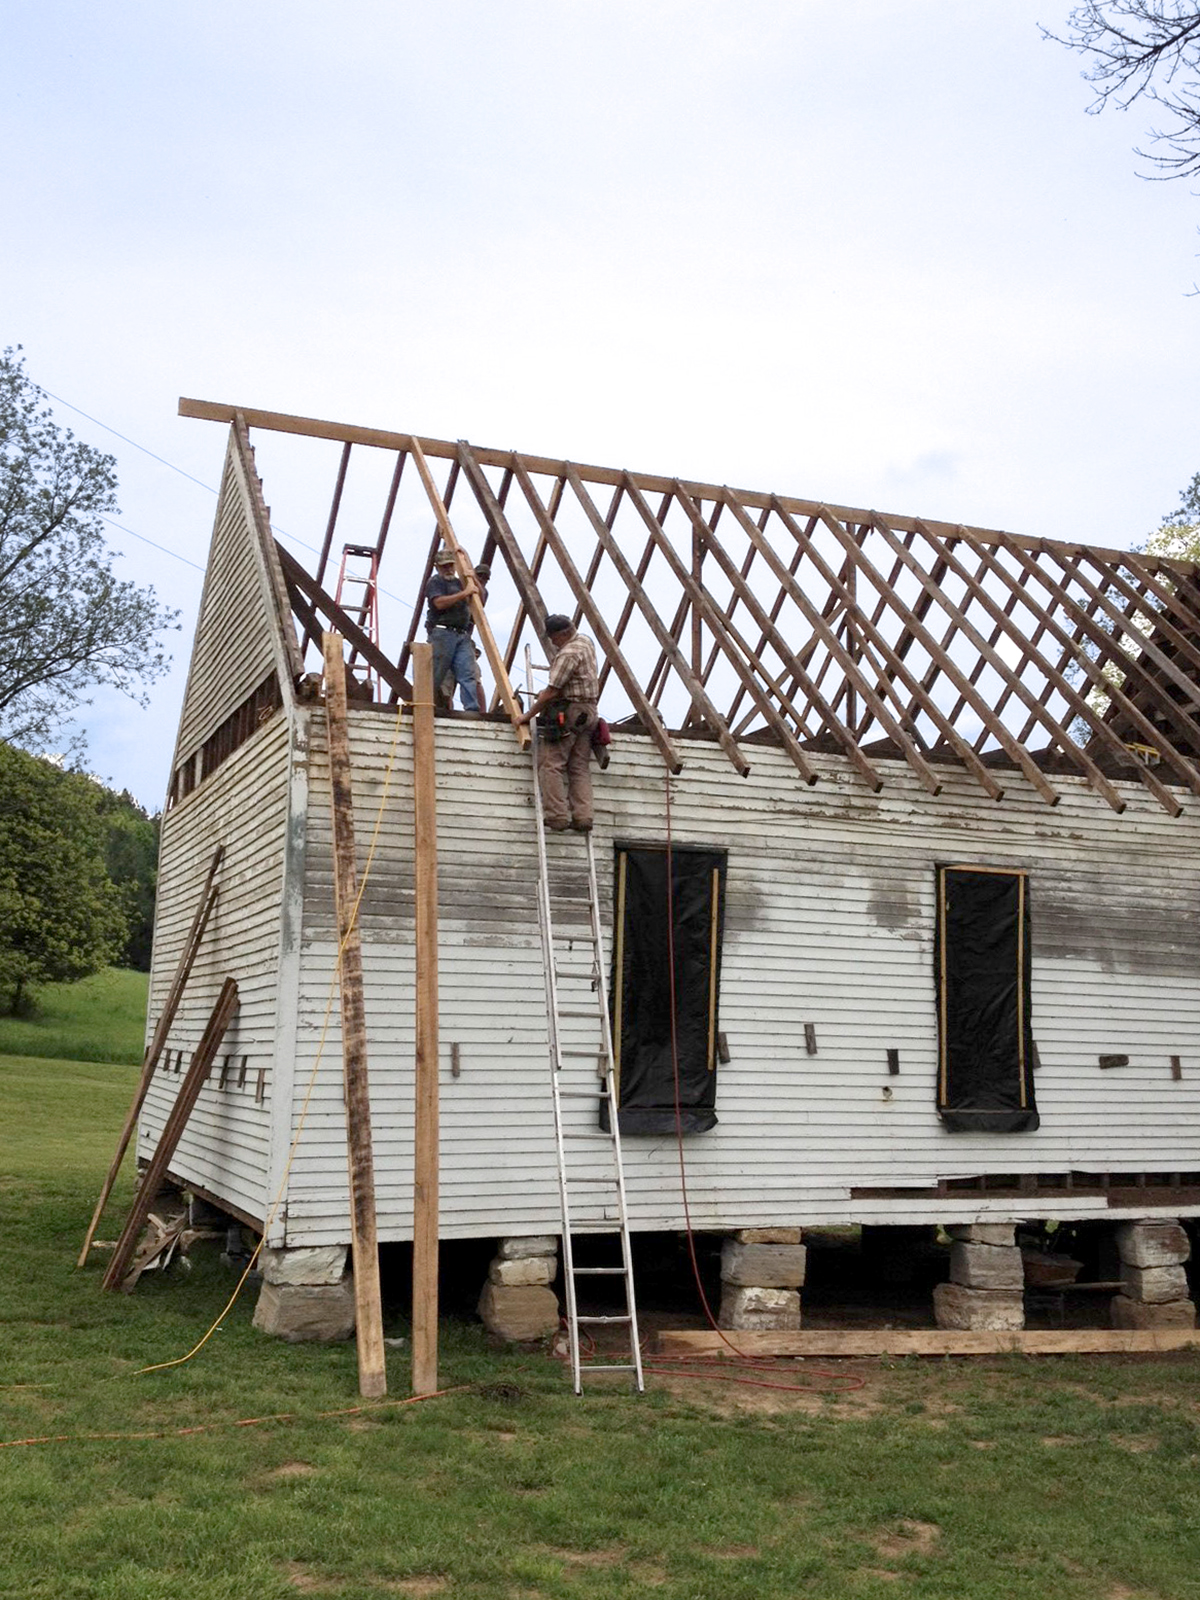 Men building rafters for the roof of the one-room schoolhouse on Foxfire Farm in Lynnville, TN